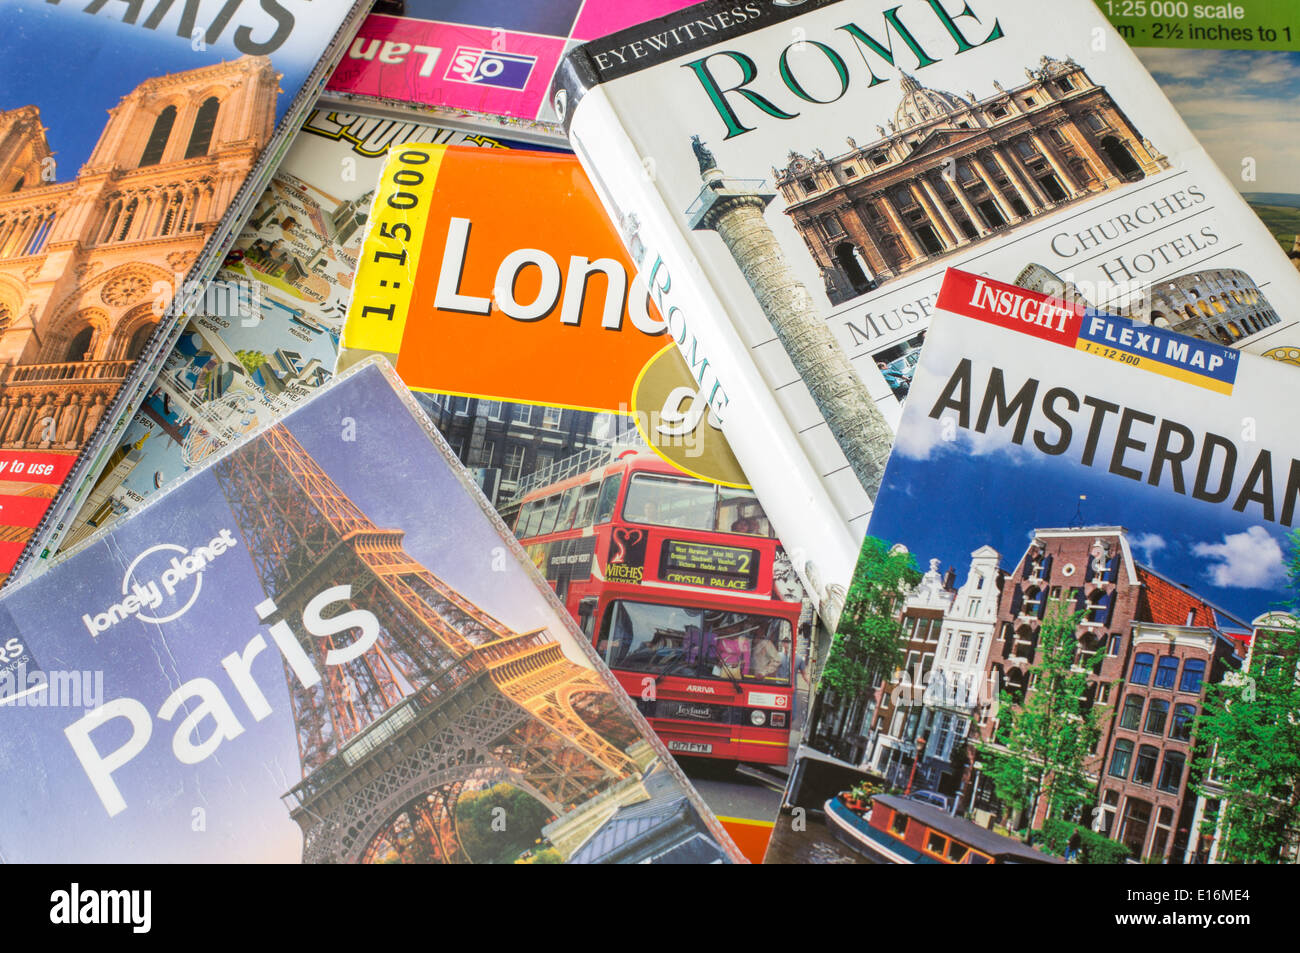 European travel and holiday guides Stock Photo